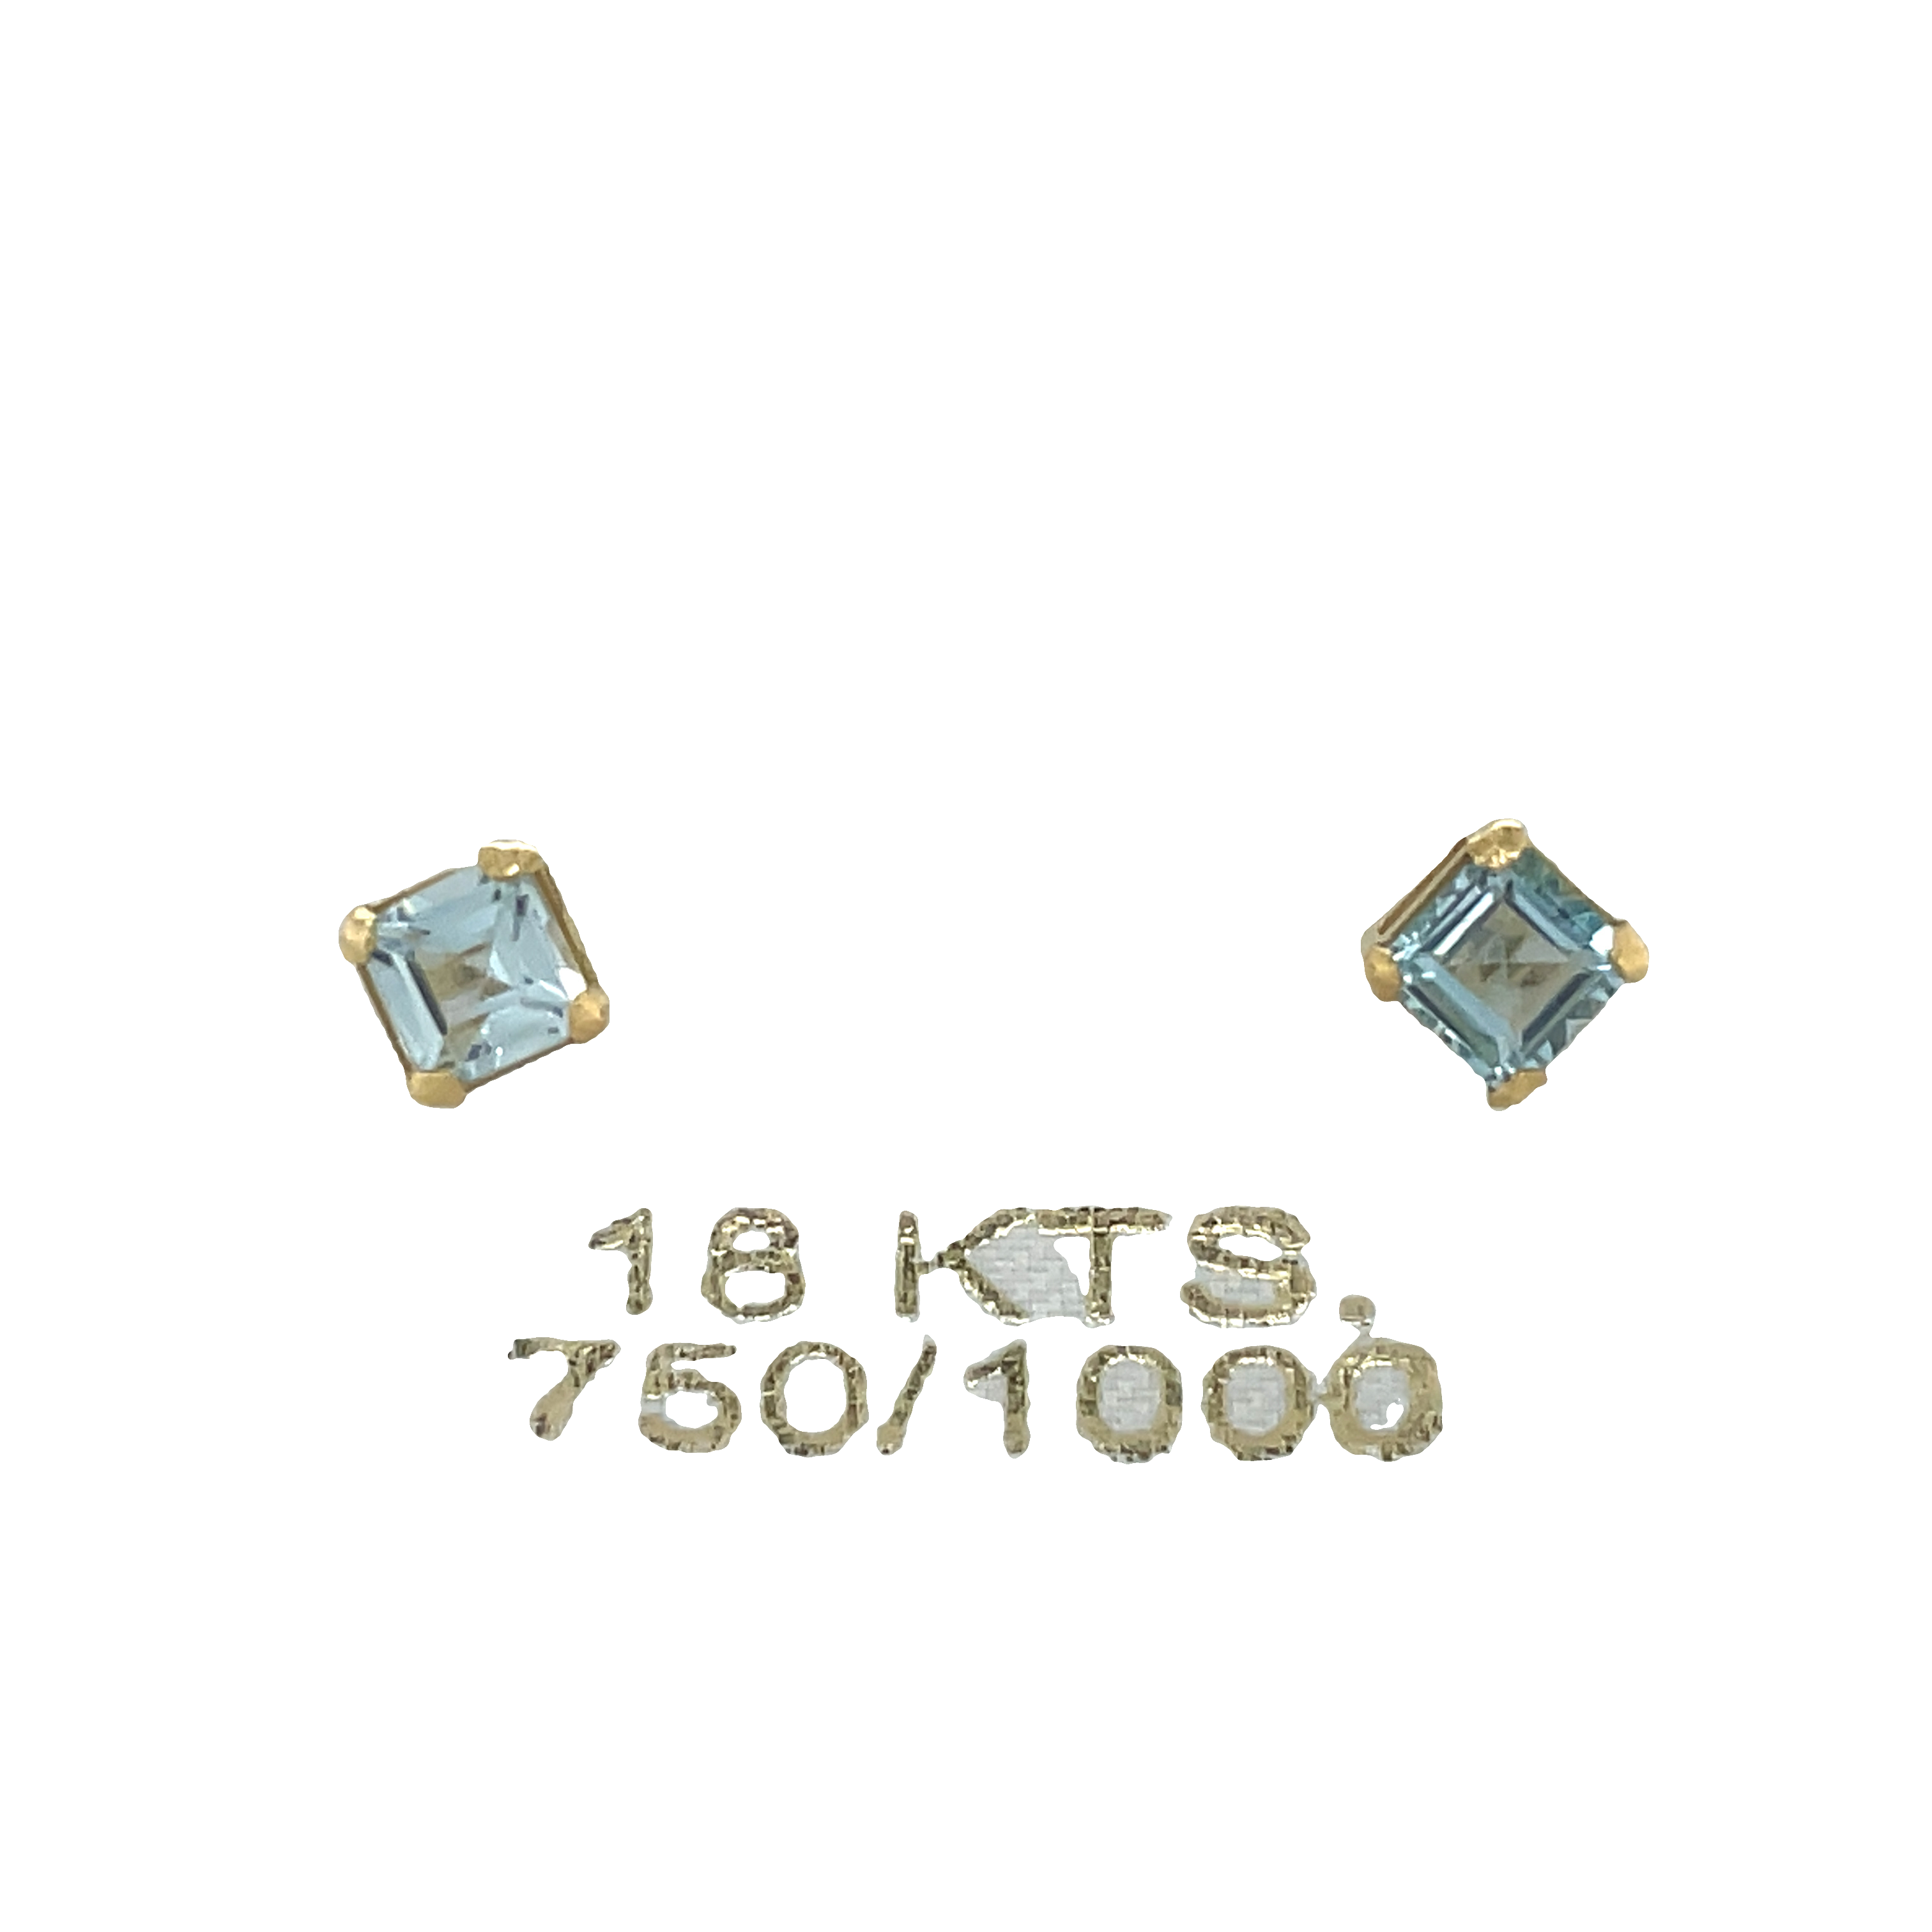 Beautiful baby earrings  Secure baby screw backs  Crafted with 18k yellow gold and beautiful small blue topaz, these baby earrings sparkle with style and peace of mind. Enjoy the assured safety of the secure baby screw backs. yellow gold  Small blue topaz